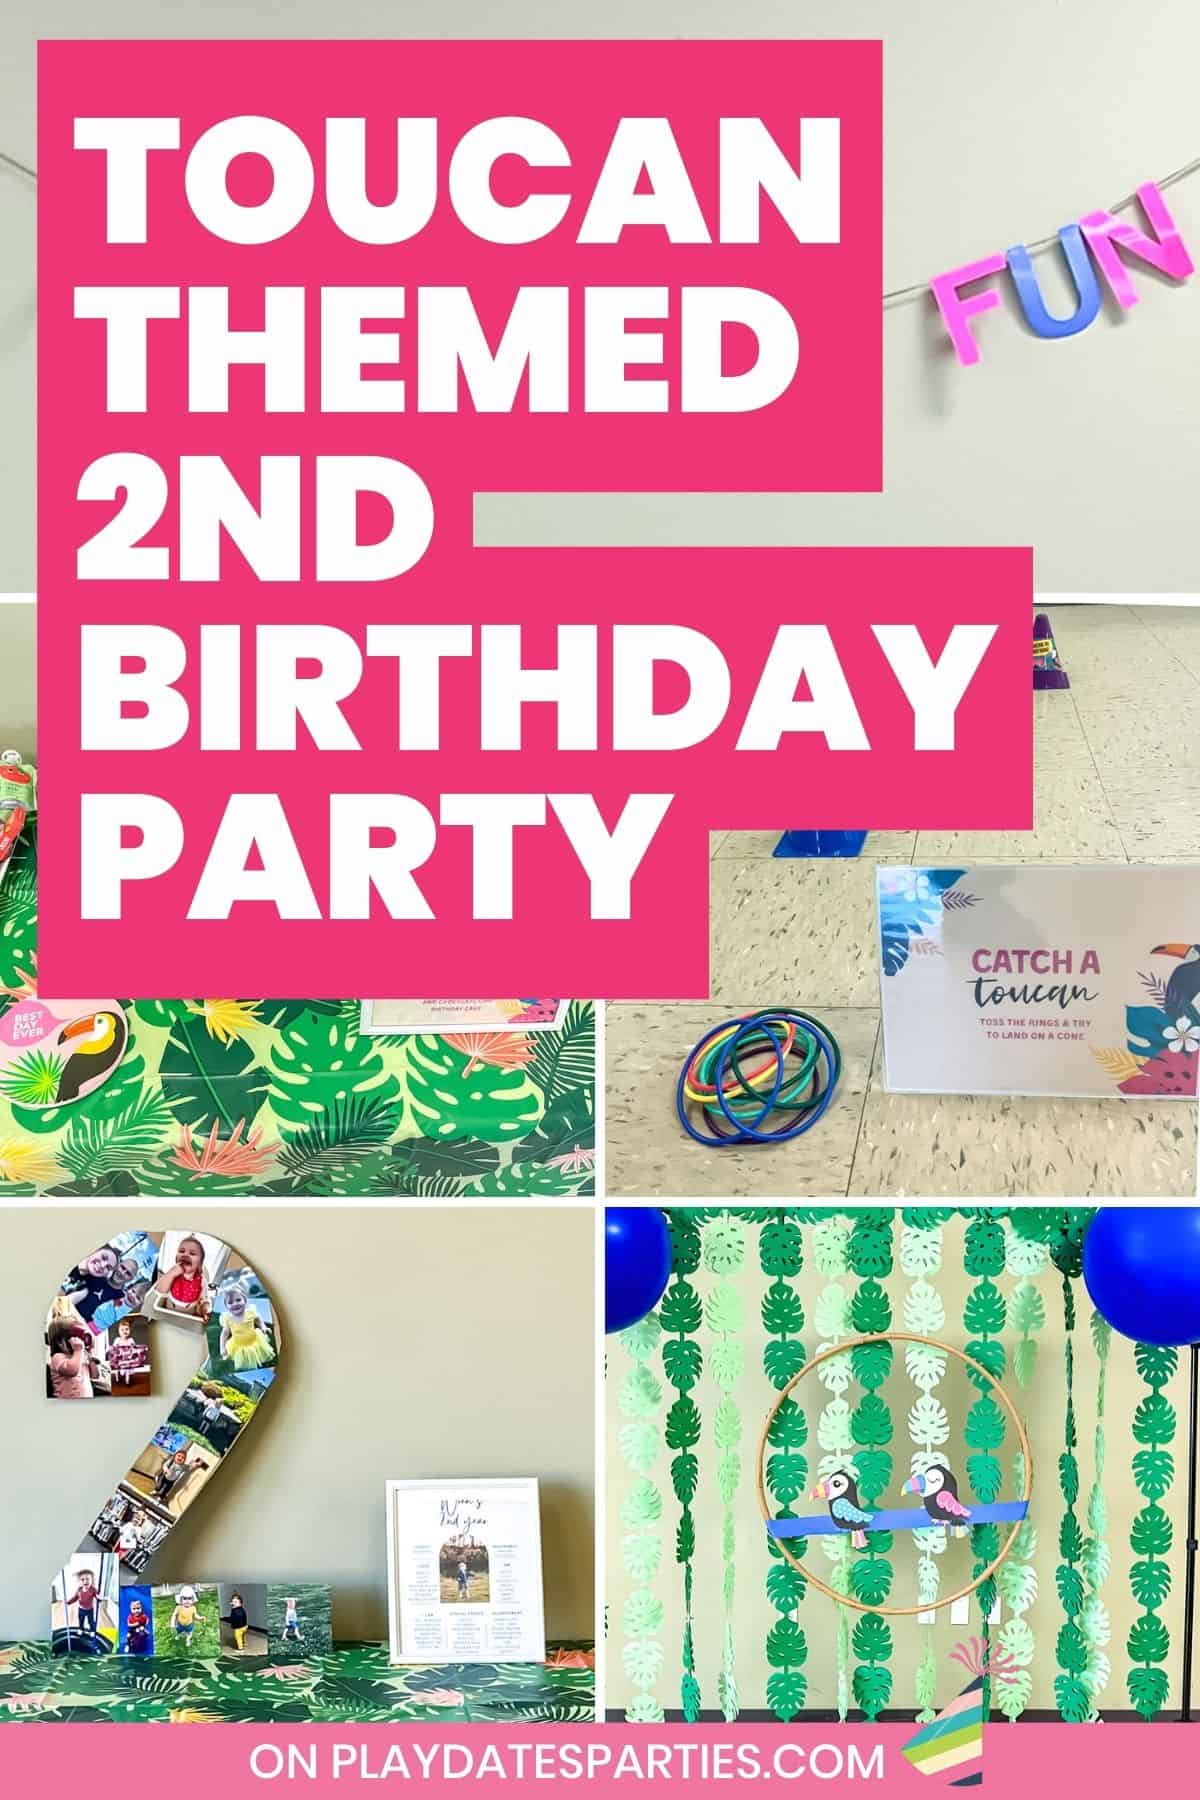 Toucan themed birthday party pin image.